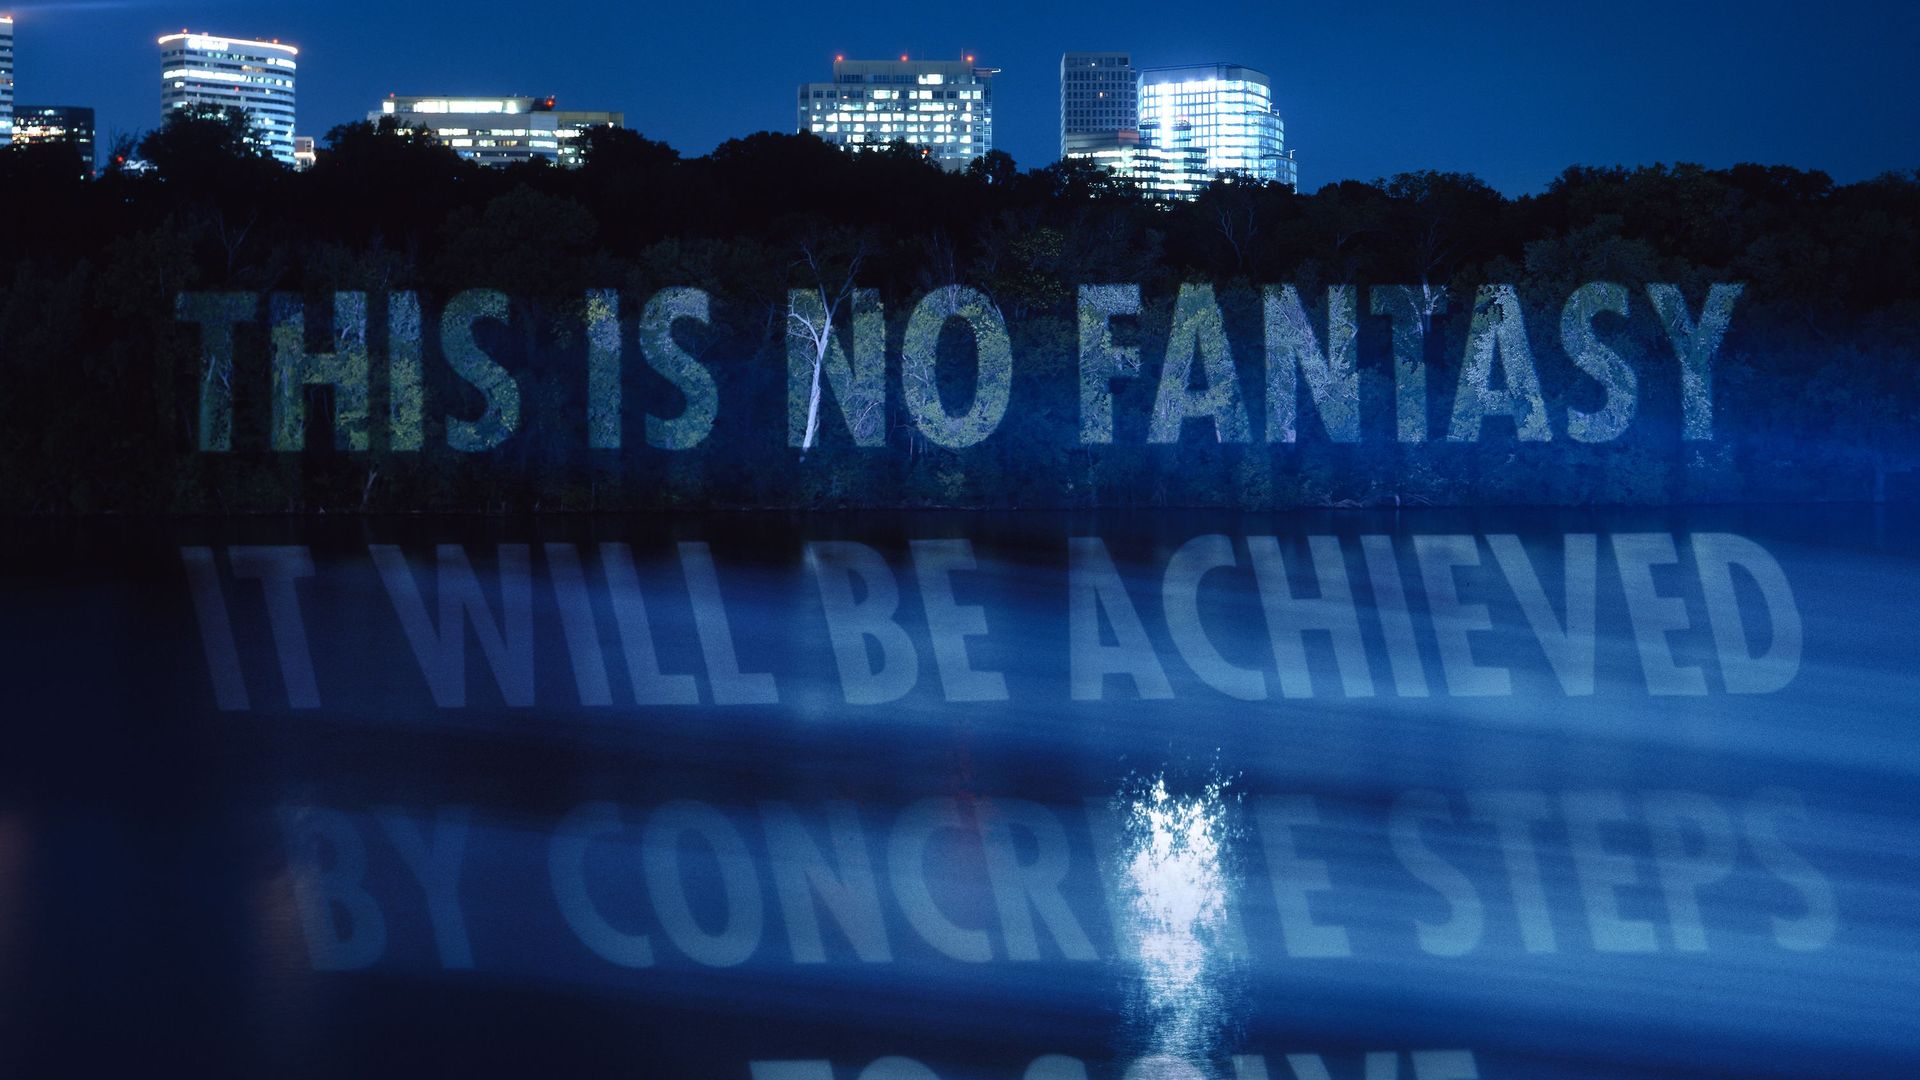 A light projection at night on the trees that line the banks of the Potomac River, that says "This is no fantasy It will be achieved by concrete steps."